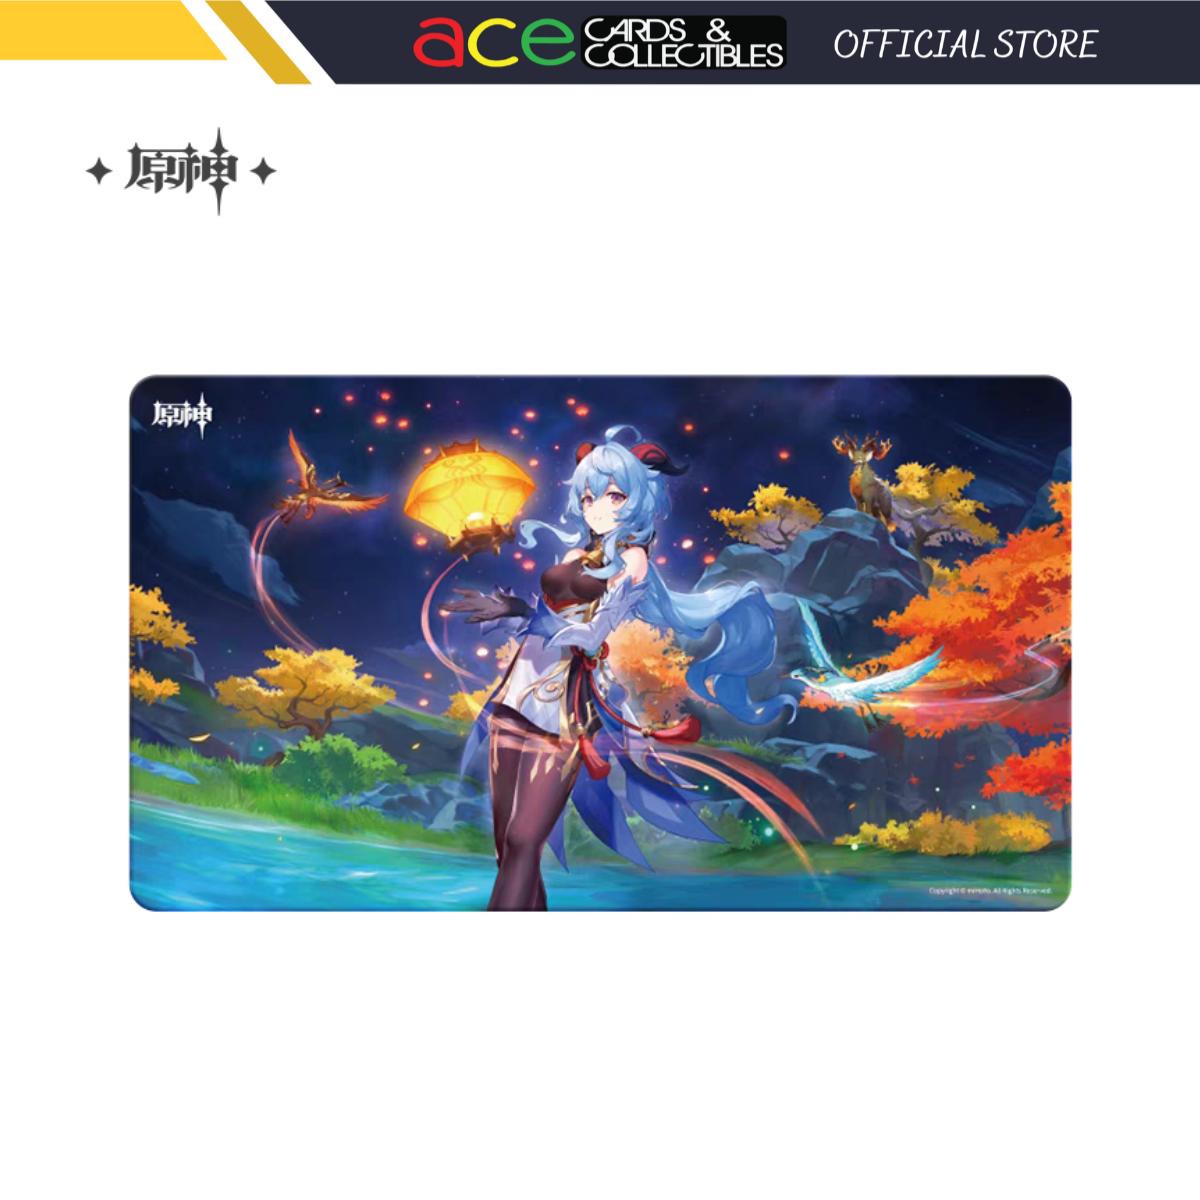 miHoYo Genshin Impact - The Exquisite Night Chimes &quot;Ganyu&quot; - Theme Mousepad-miHoYo-Ace Cards &amp; Collectibles